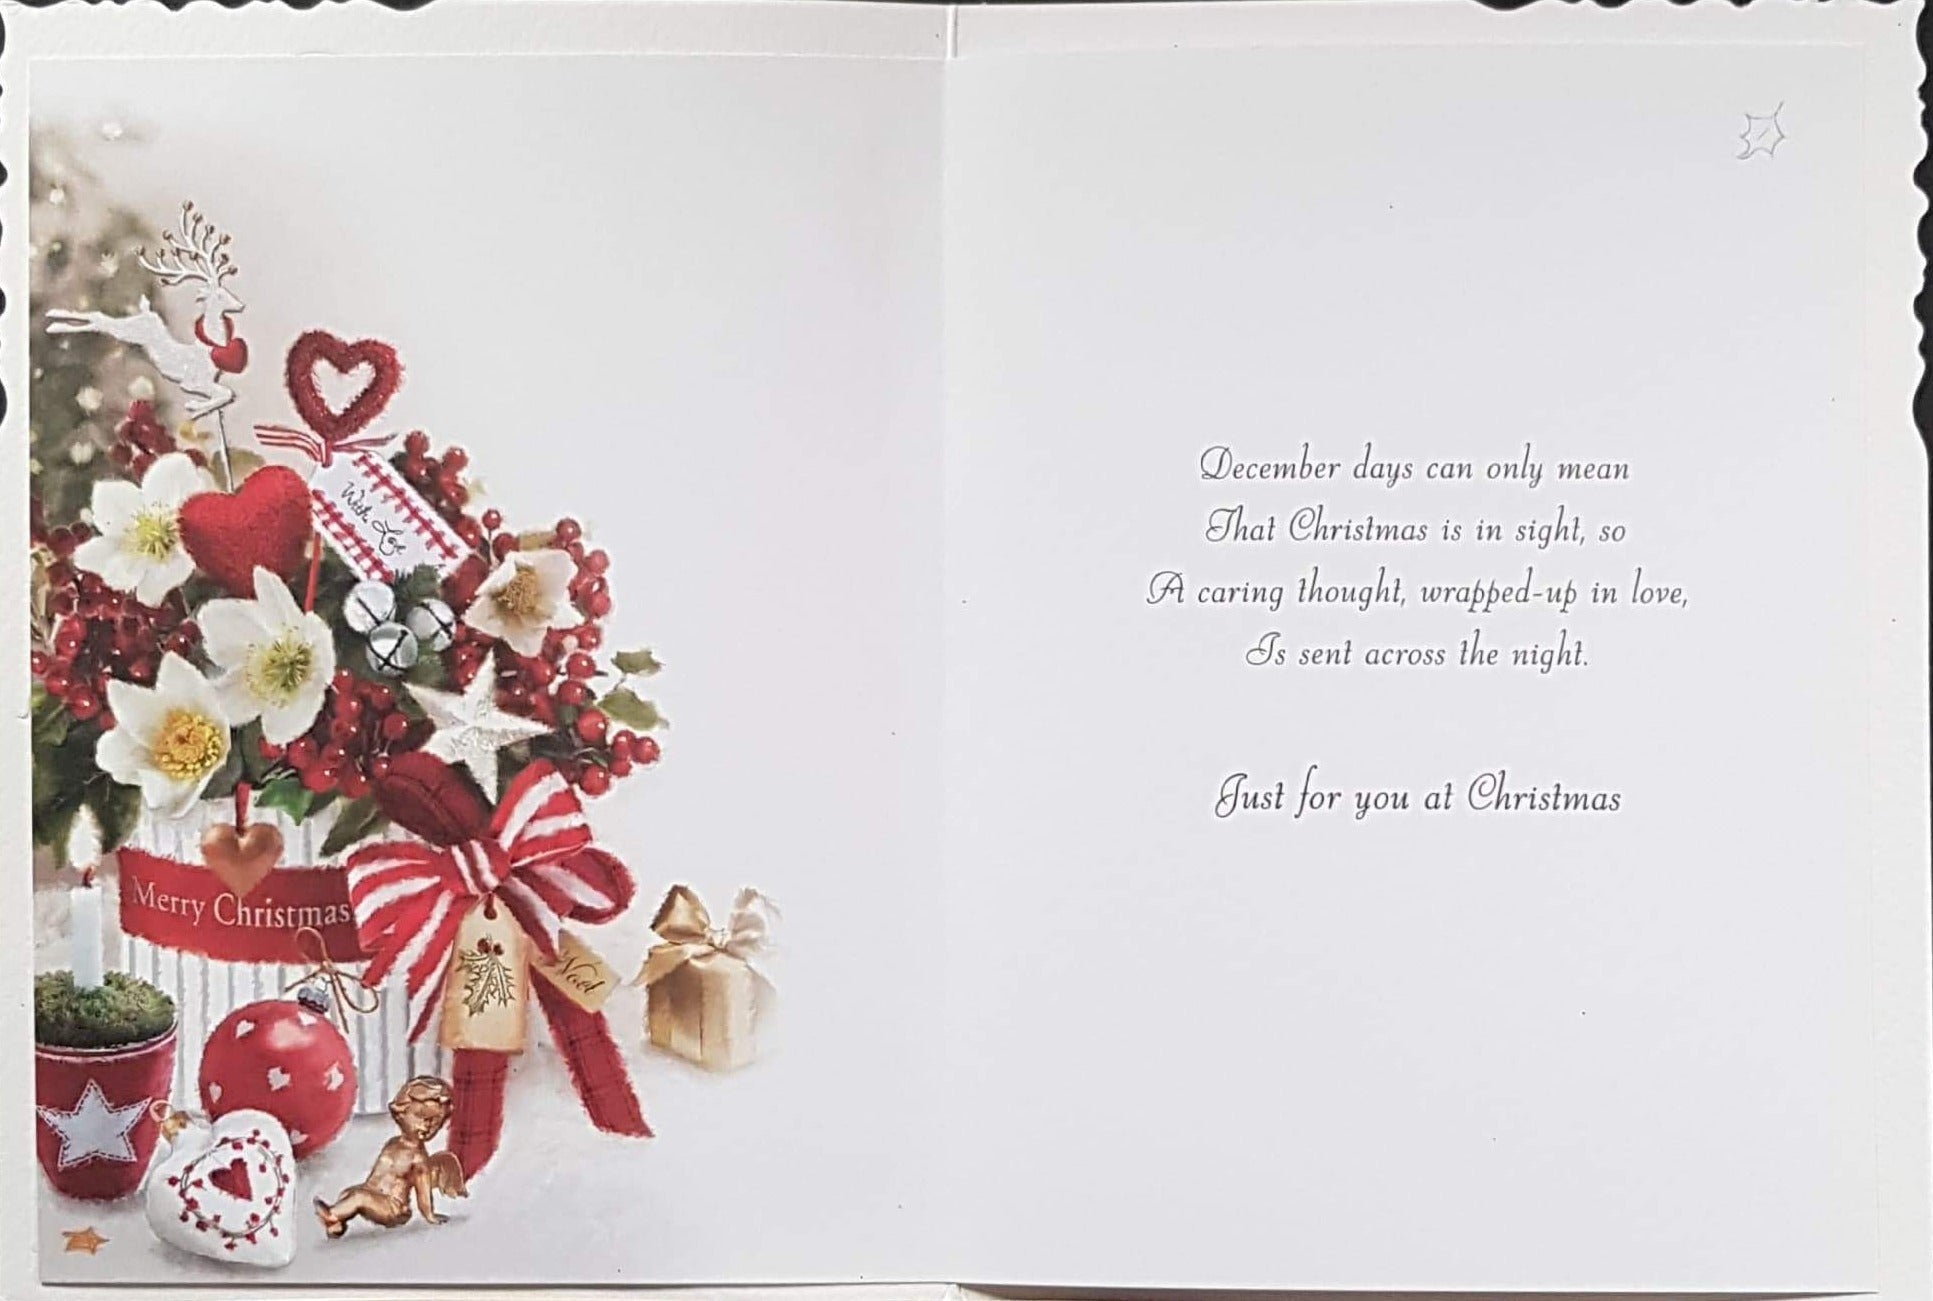 Thinking of You Christmas Card - A Caring Thought For You & Flowers & Berries in Basket